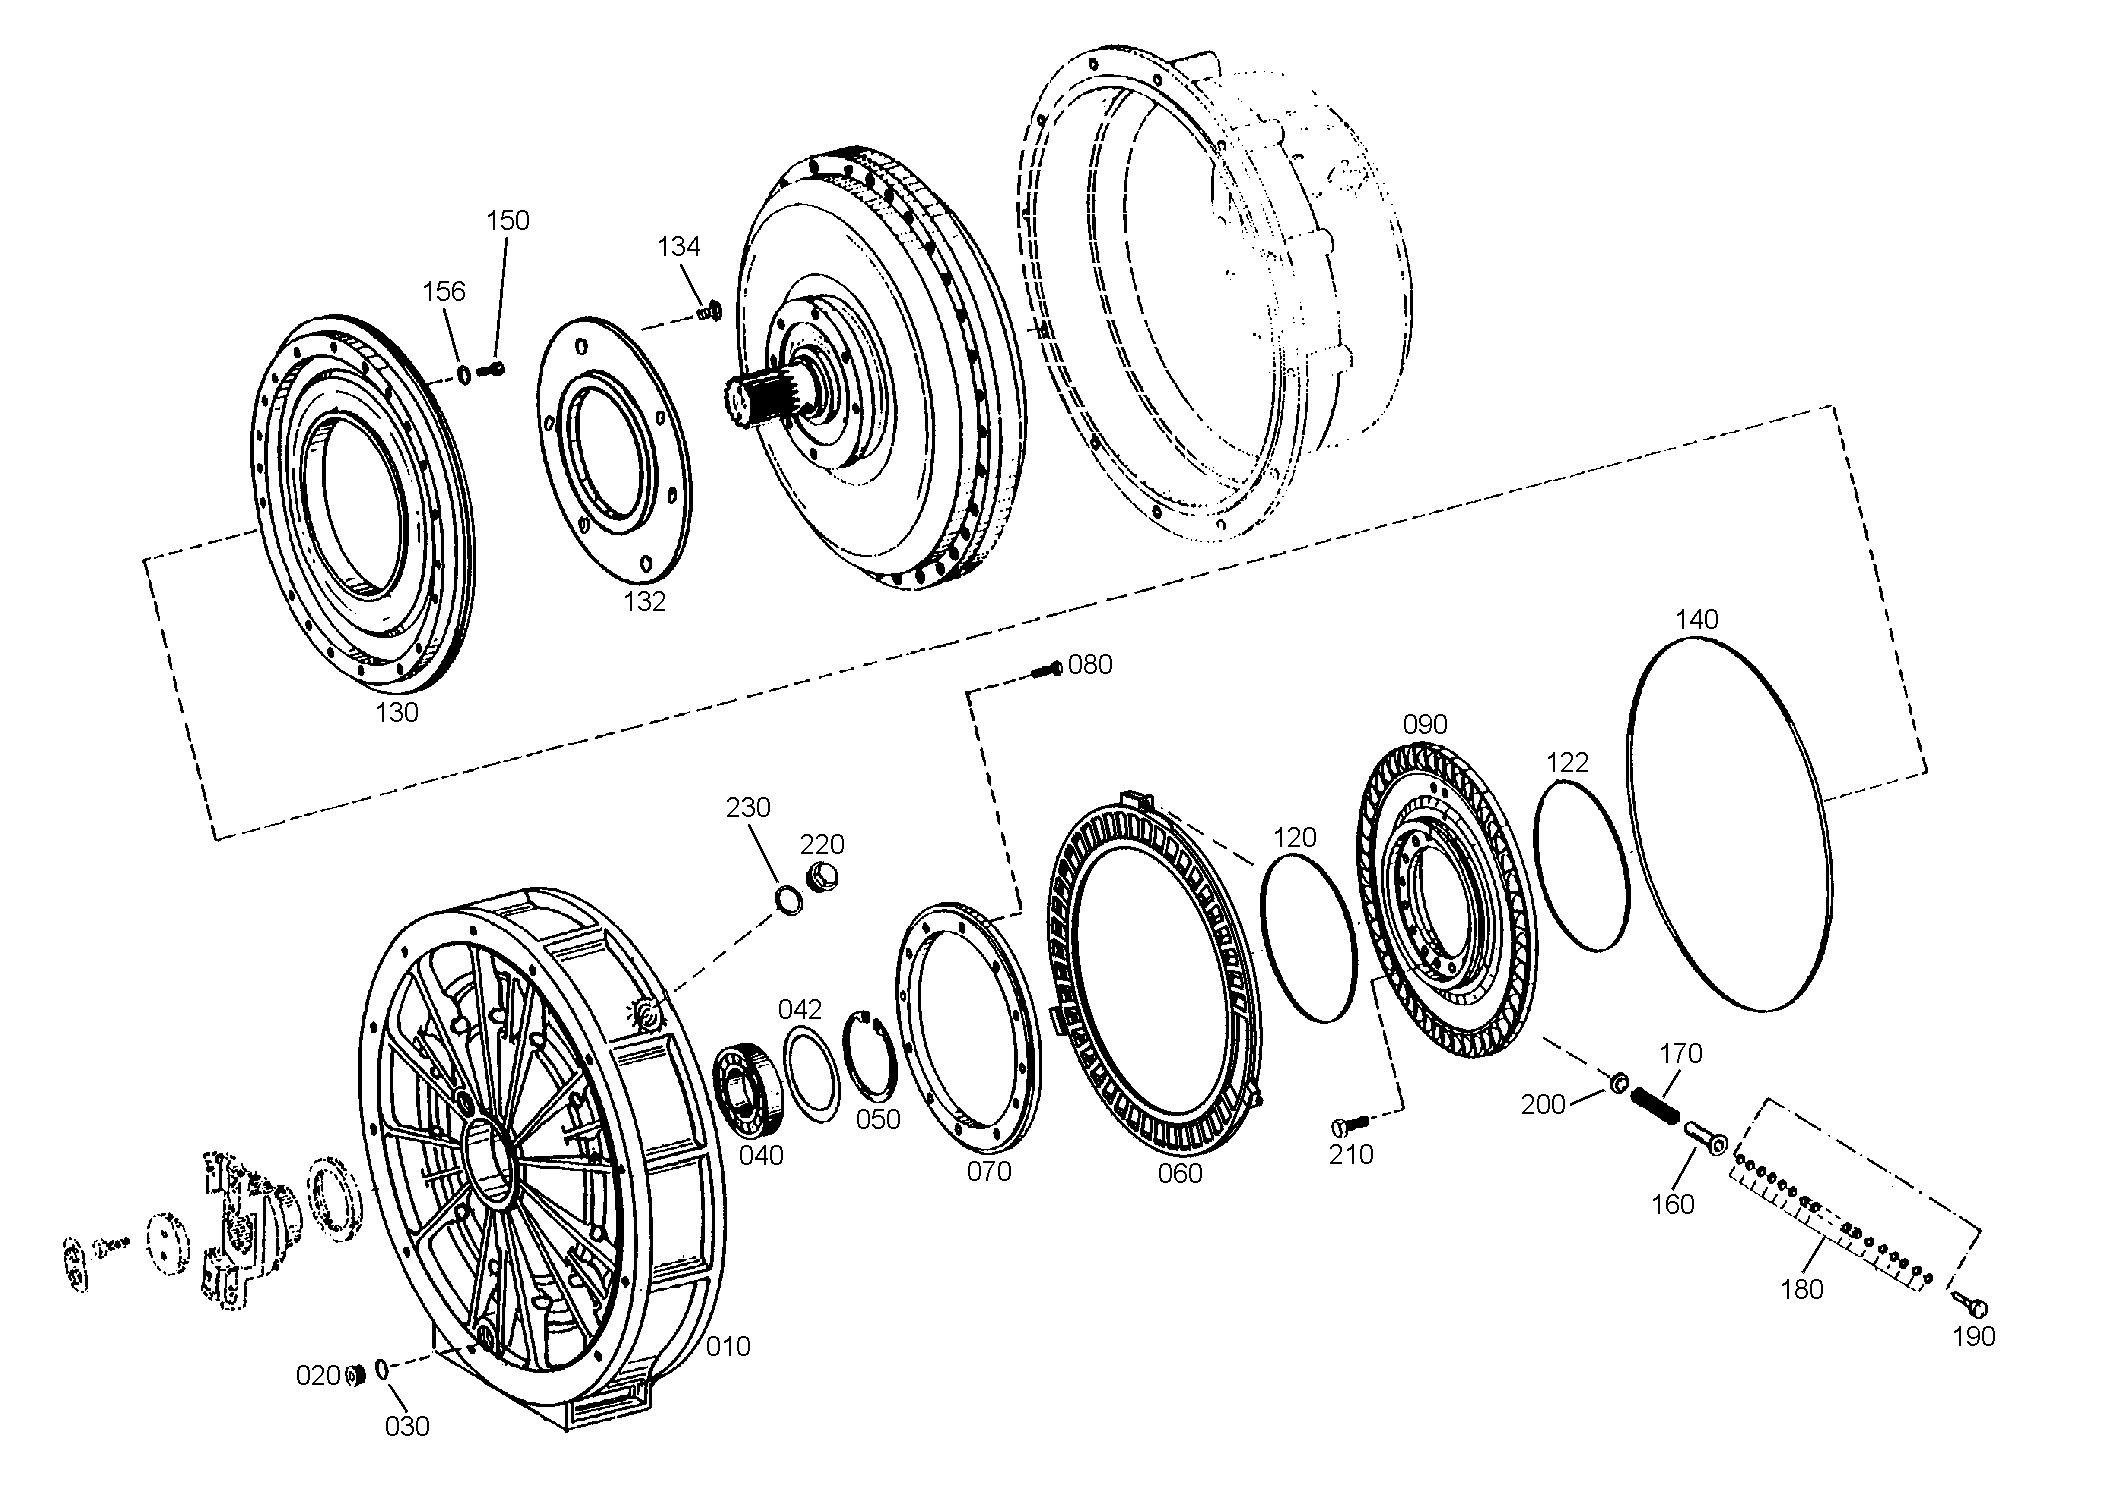 drawing for TEREX EQUIPMENT LIMITED 15266981 - CUP SPRING (figure 1)